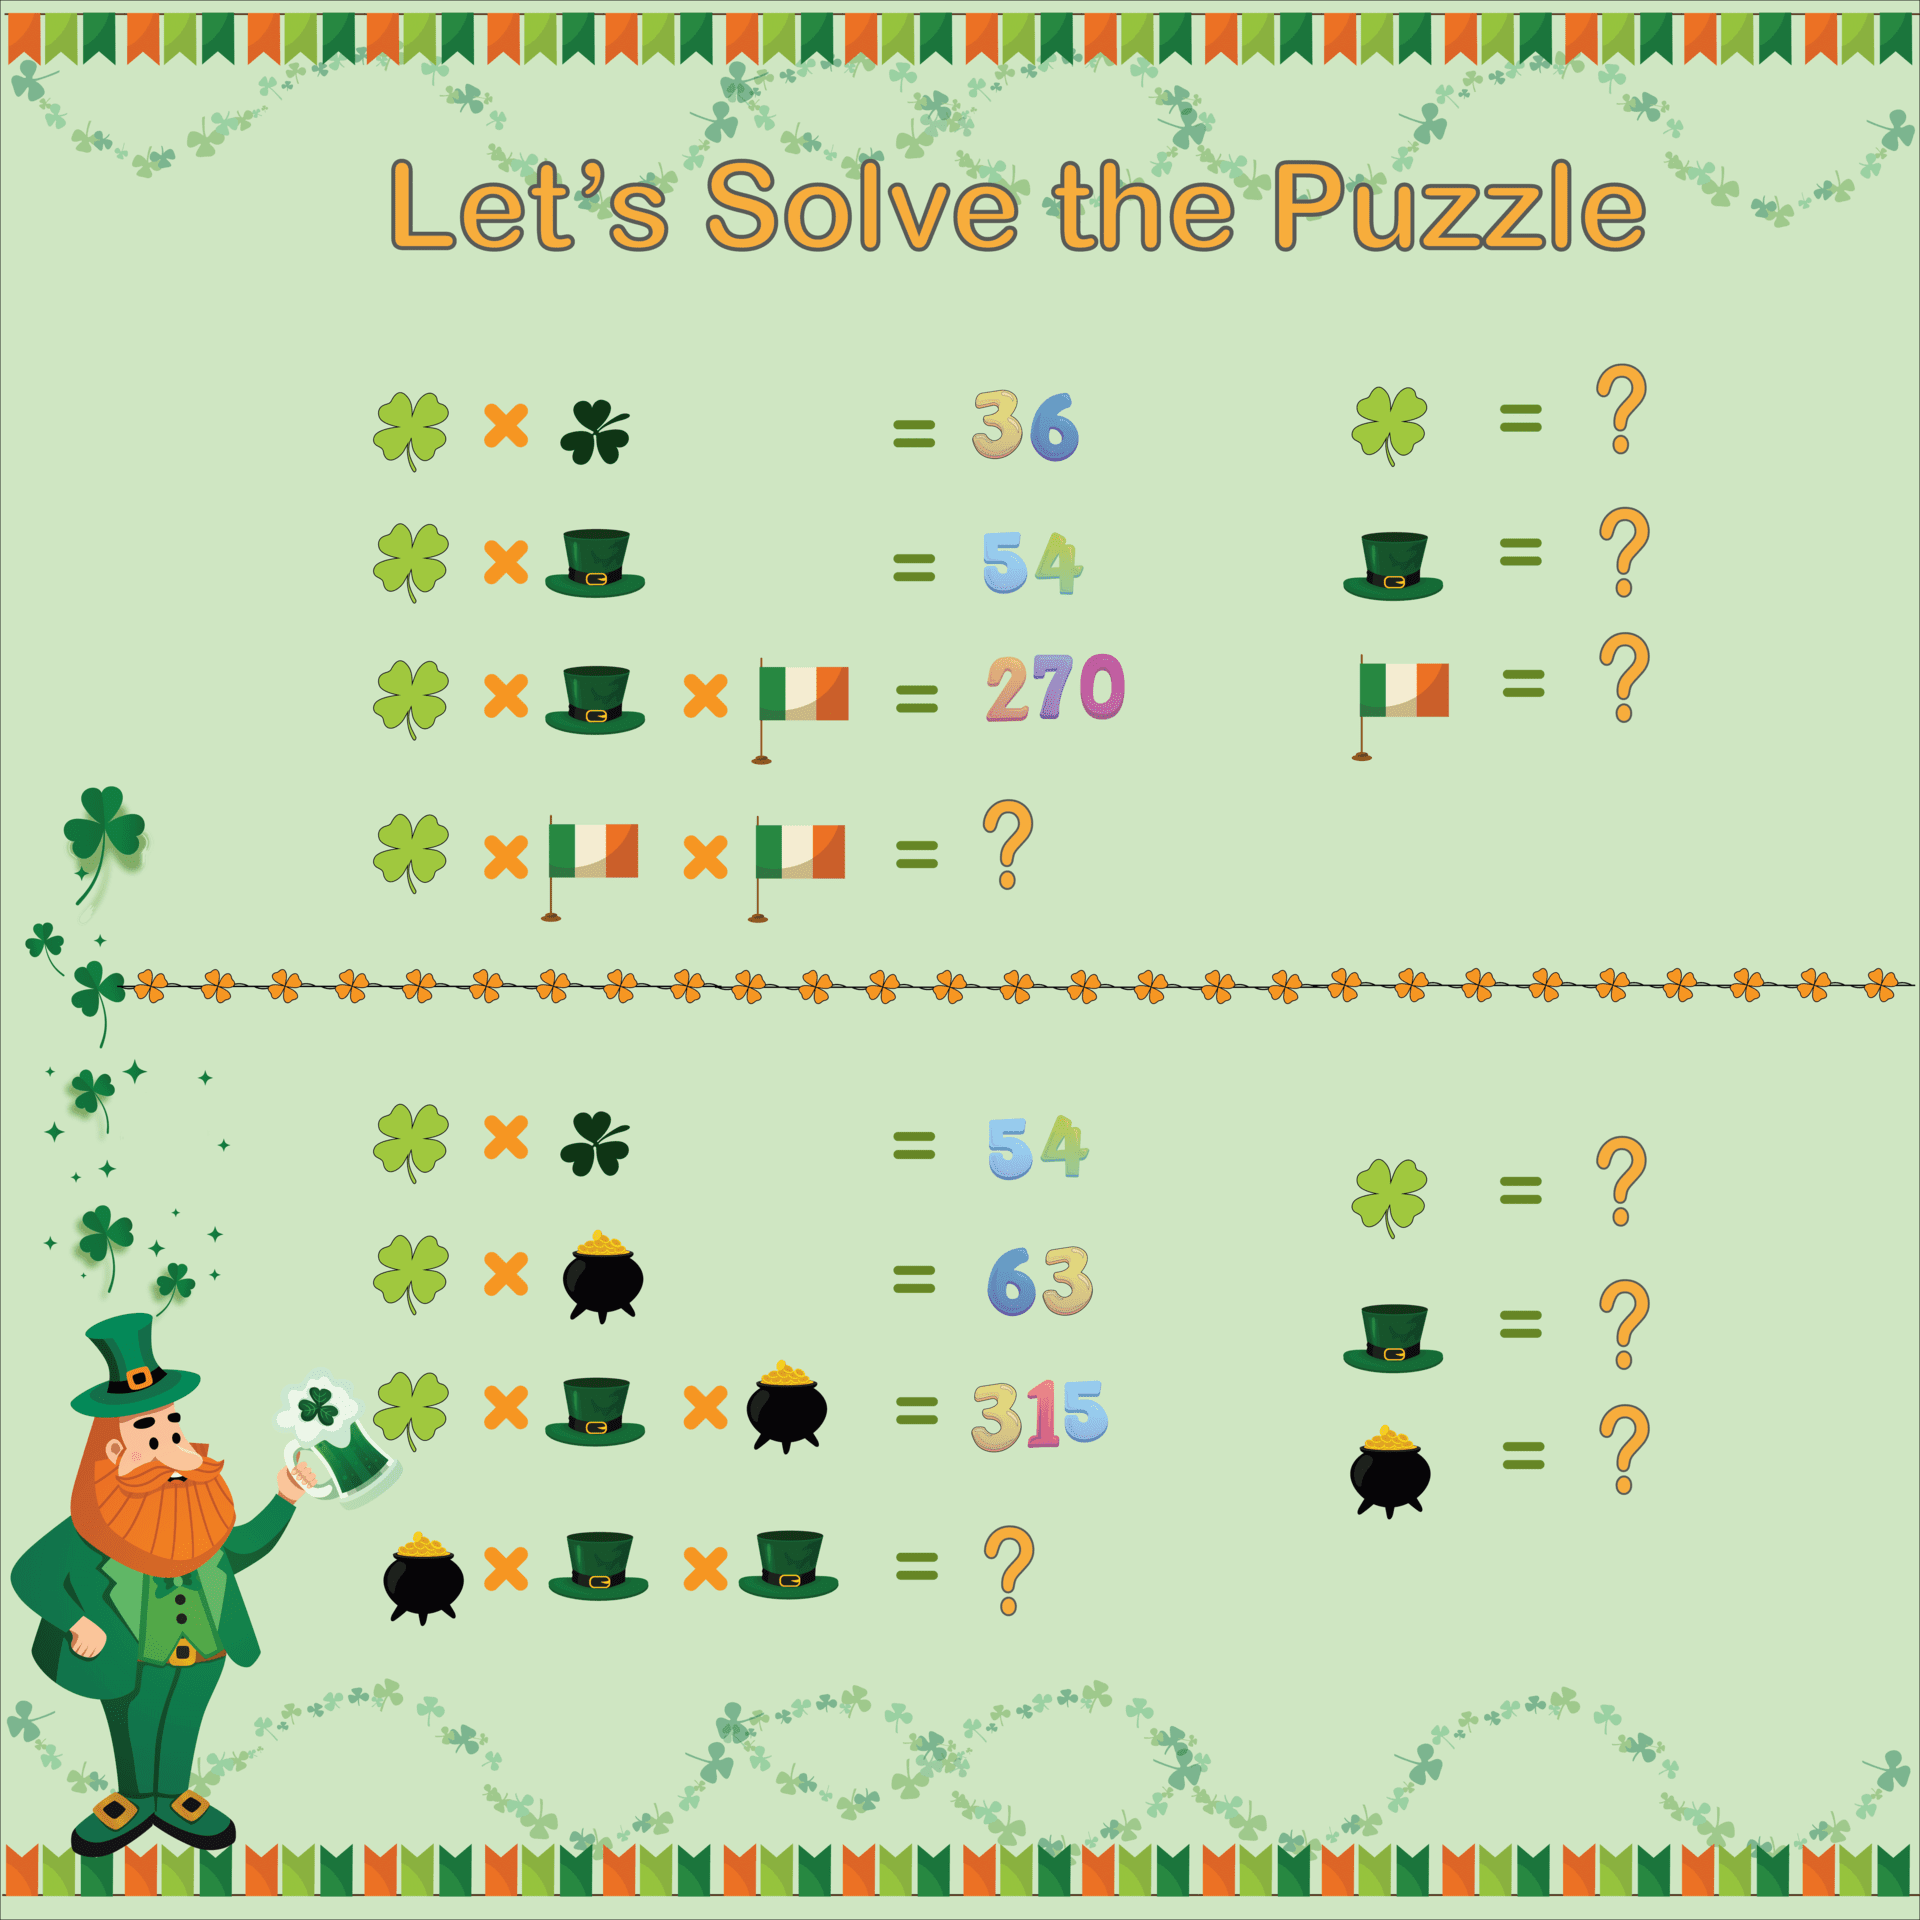 Finding Values of St. Patrick's Day Elements from Multiplication